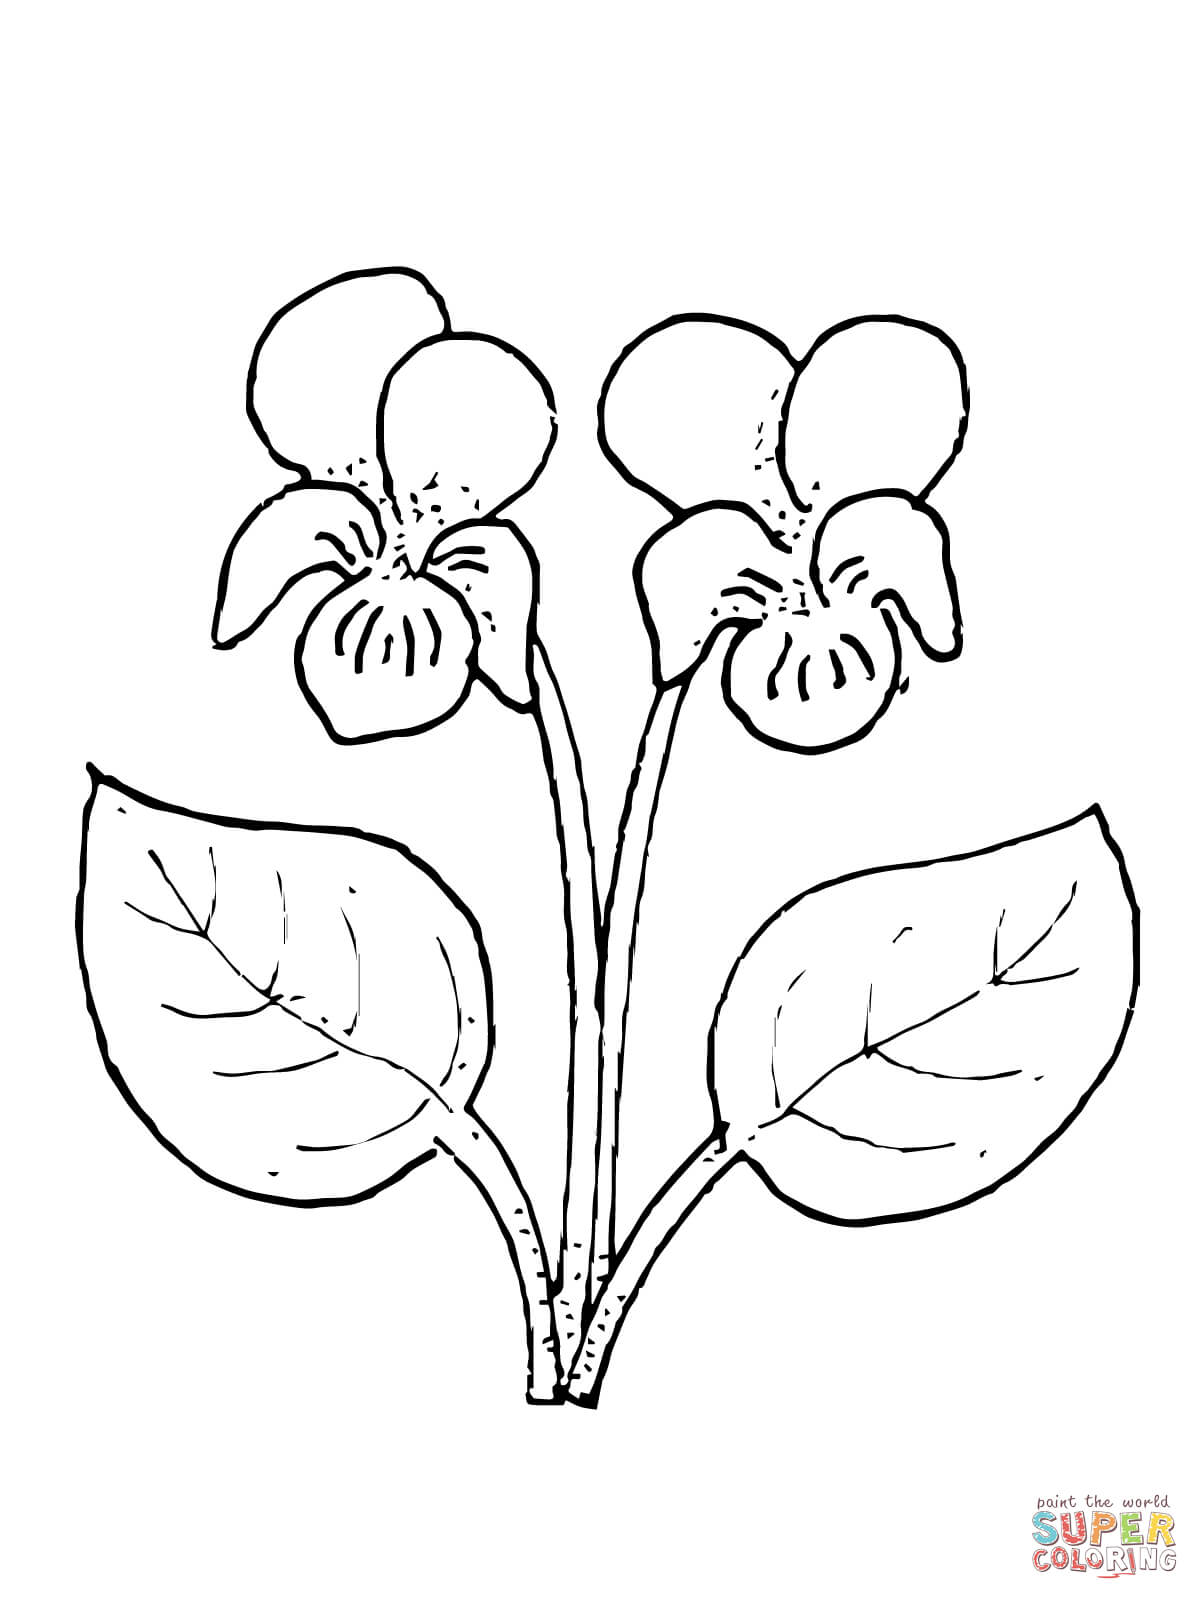 Violet flower coloring page free printable coloring pages